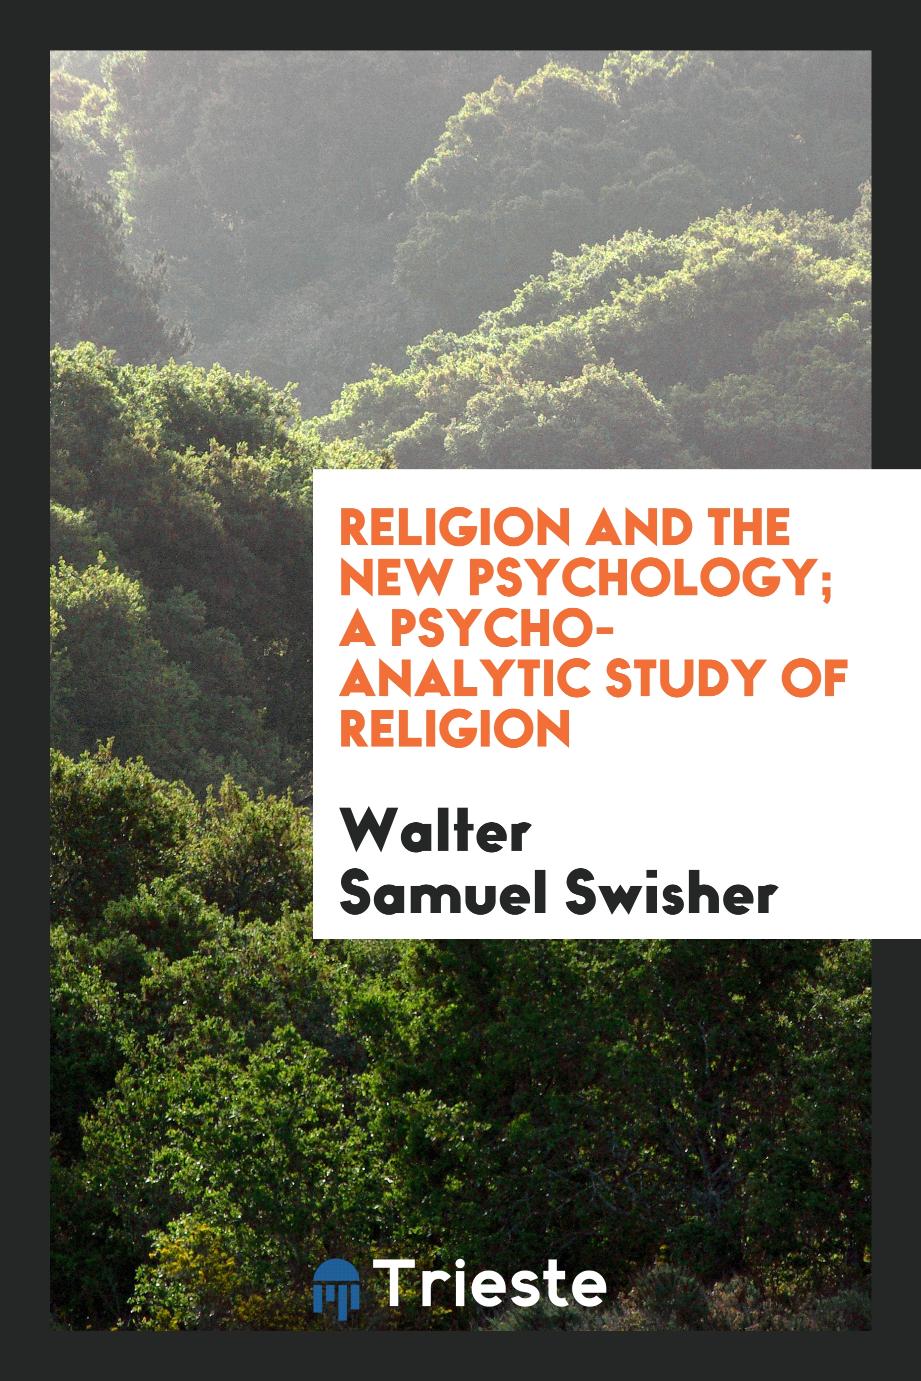 Religion and the new psychology; a psycho-analytic study of religion